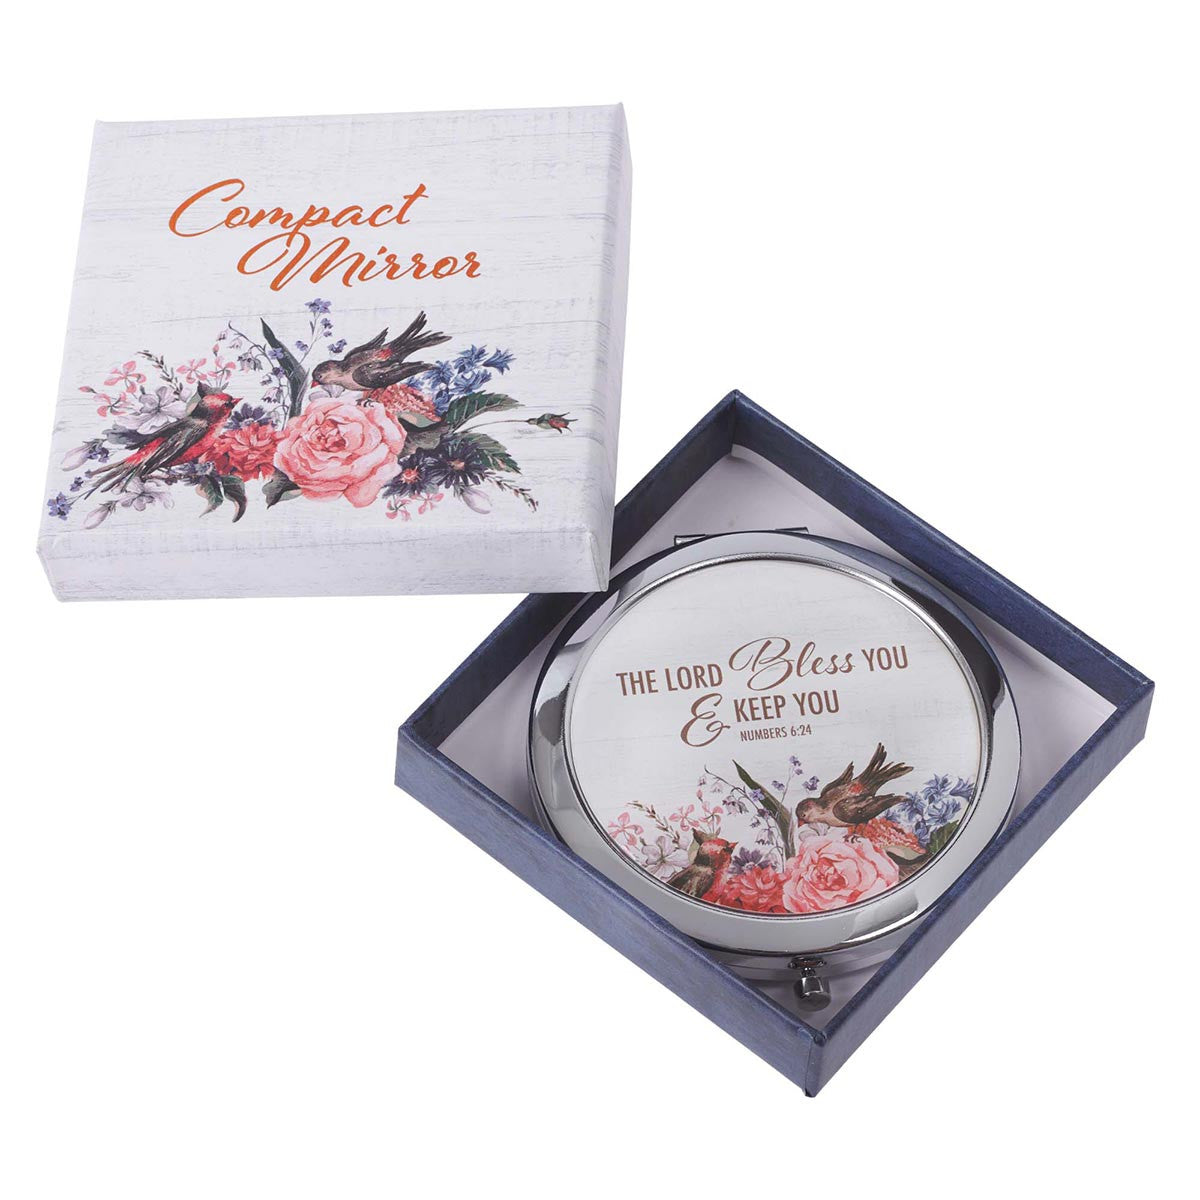 Image of Bless You & Keep You Compact Mirror - Numbers 6:24 other